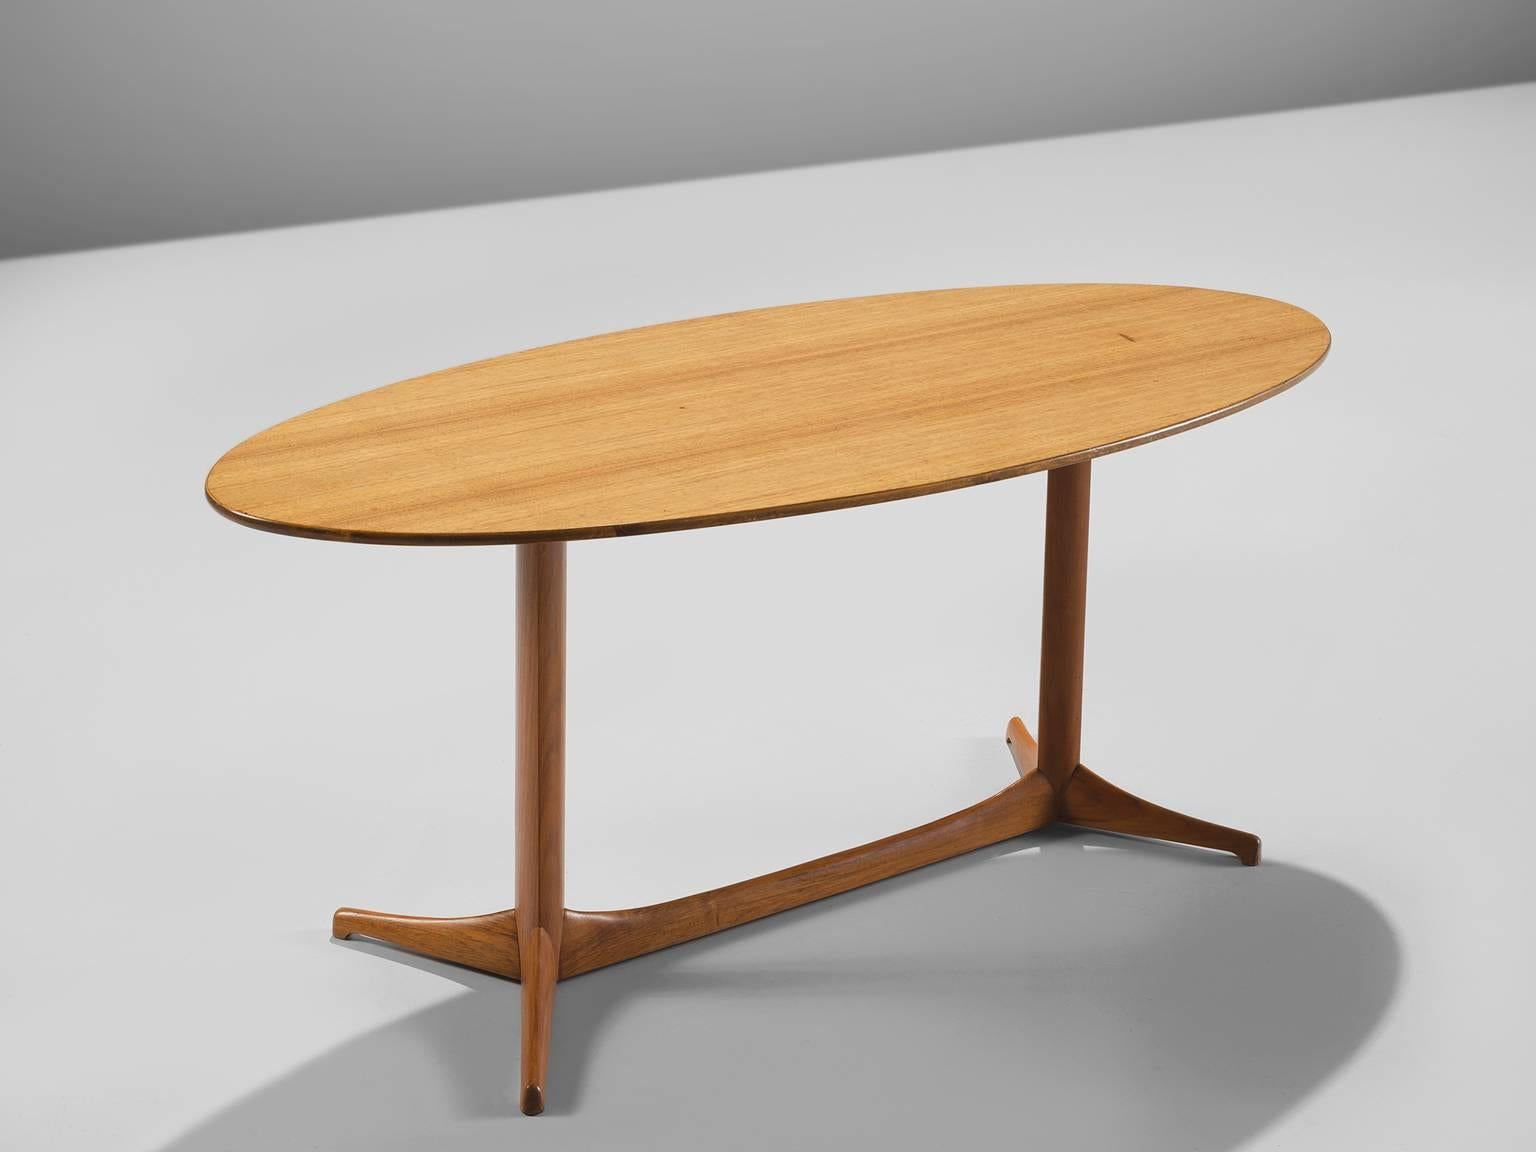 Kerstin Hörlin-Holmquist for Nordiska Kompaniet, Plommonet coffee table, mahogany, Sweden, 1950s. 

This oval mahogany side table is executed with a solid biomorphic trestle leg. The oval table features a slim top and is very well balanced with